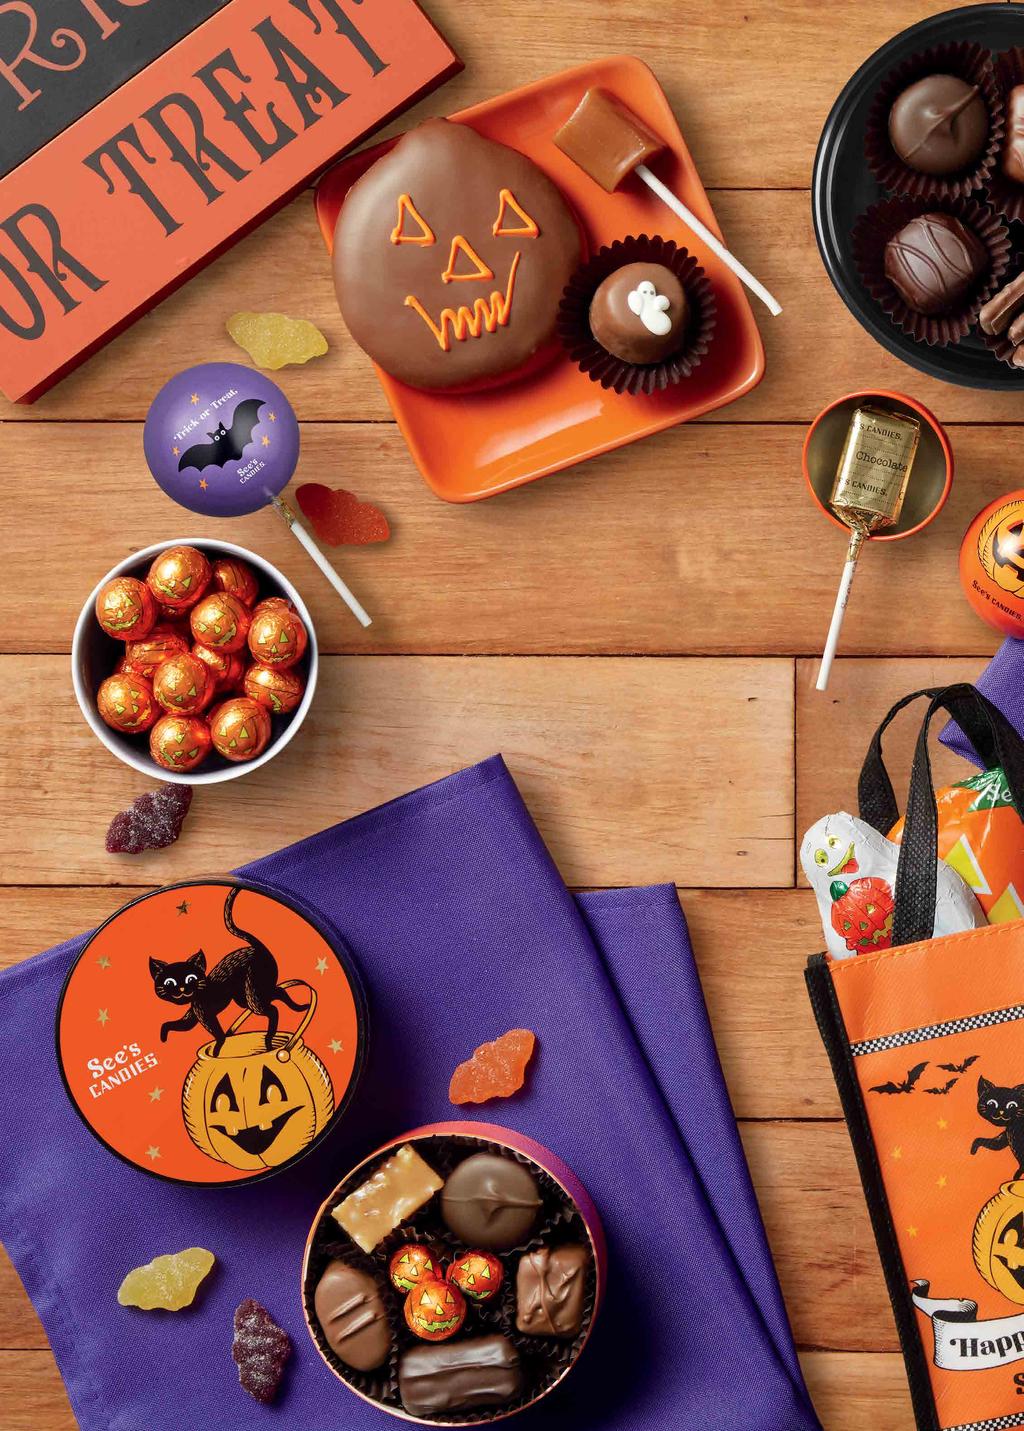 Dear friends, At See s, we love Halloween and all the sweet traditions that go along with it.